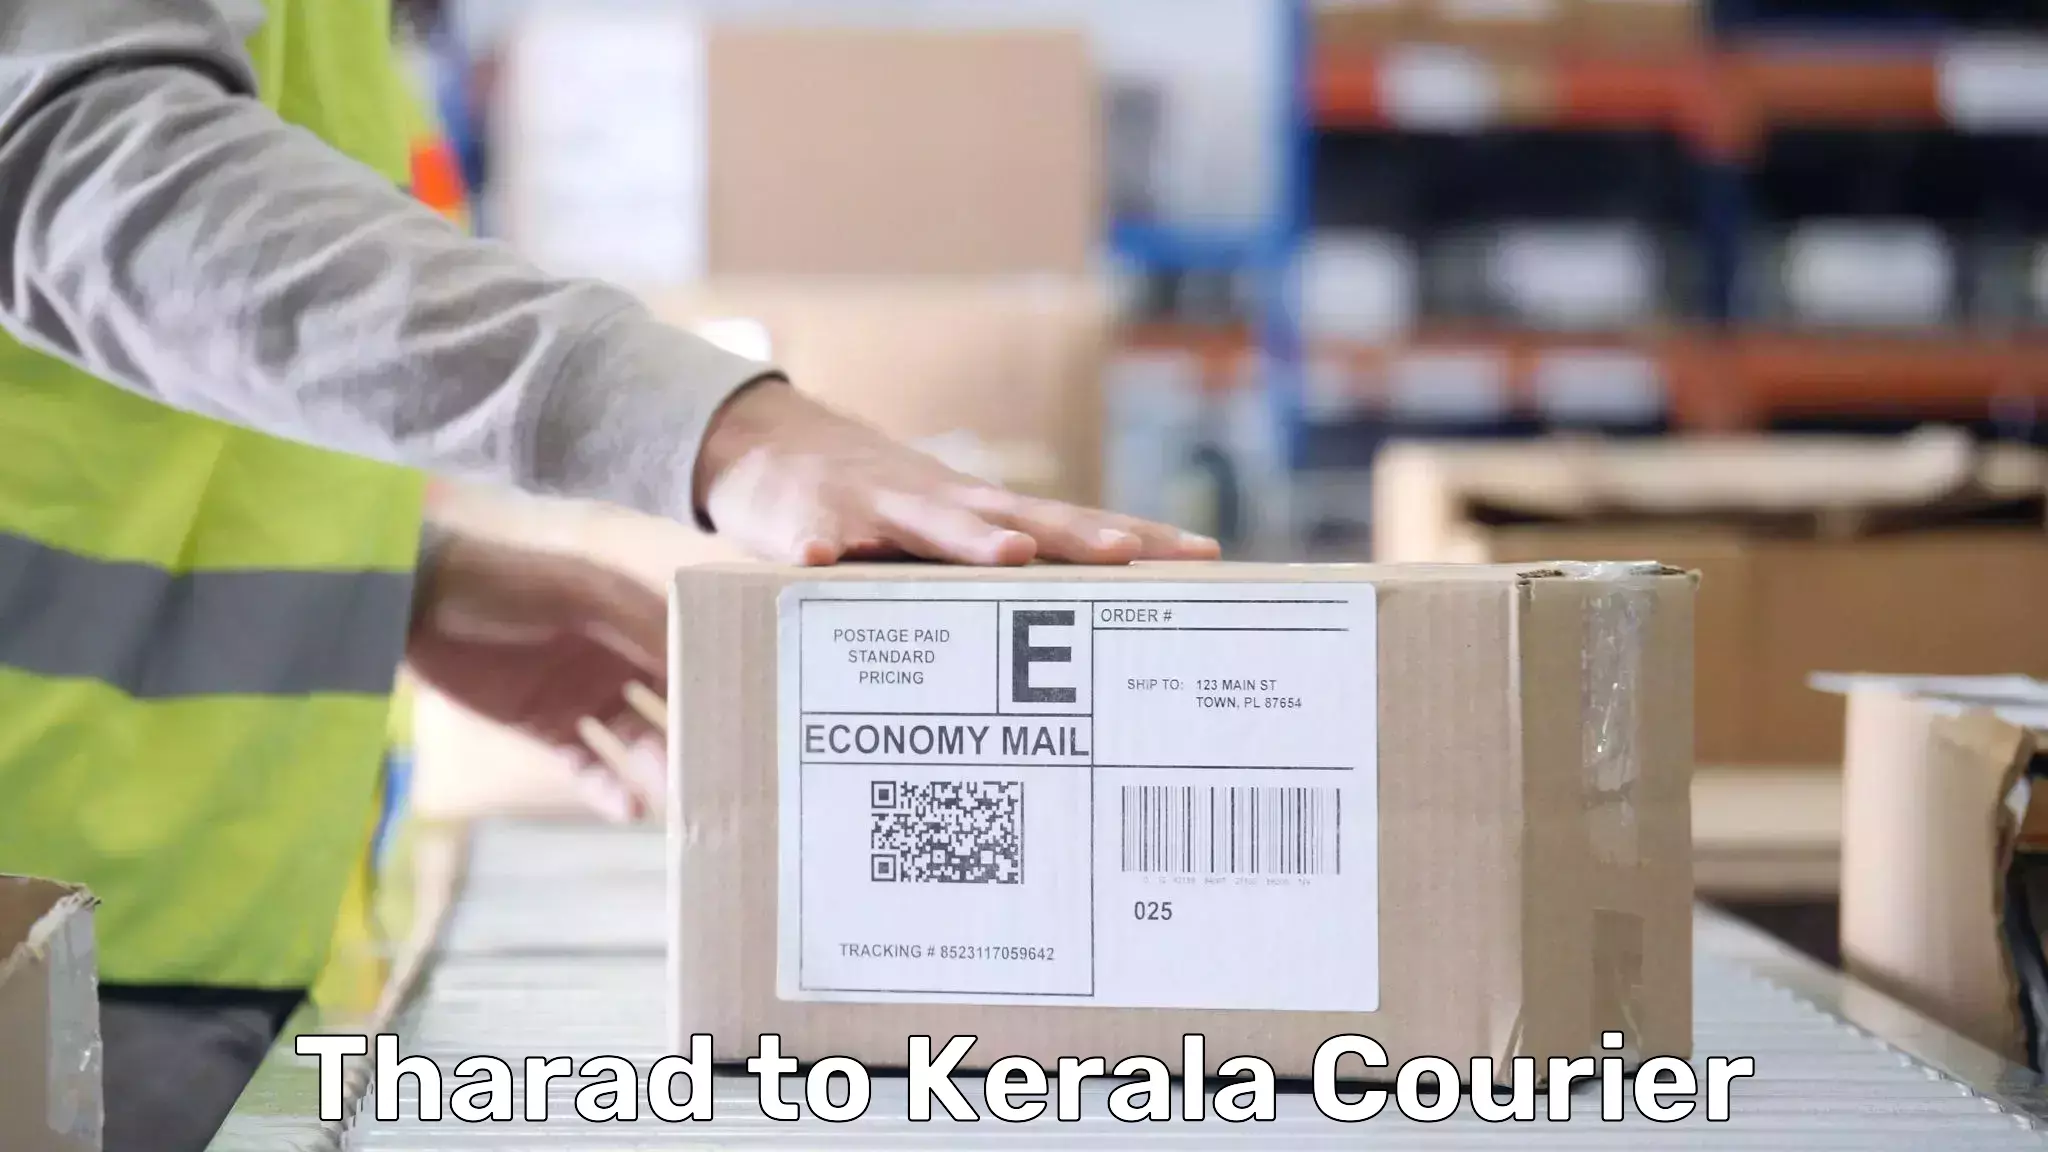 Luggage delivery operations in Tharad to Kerala